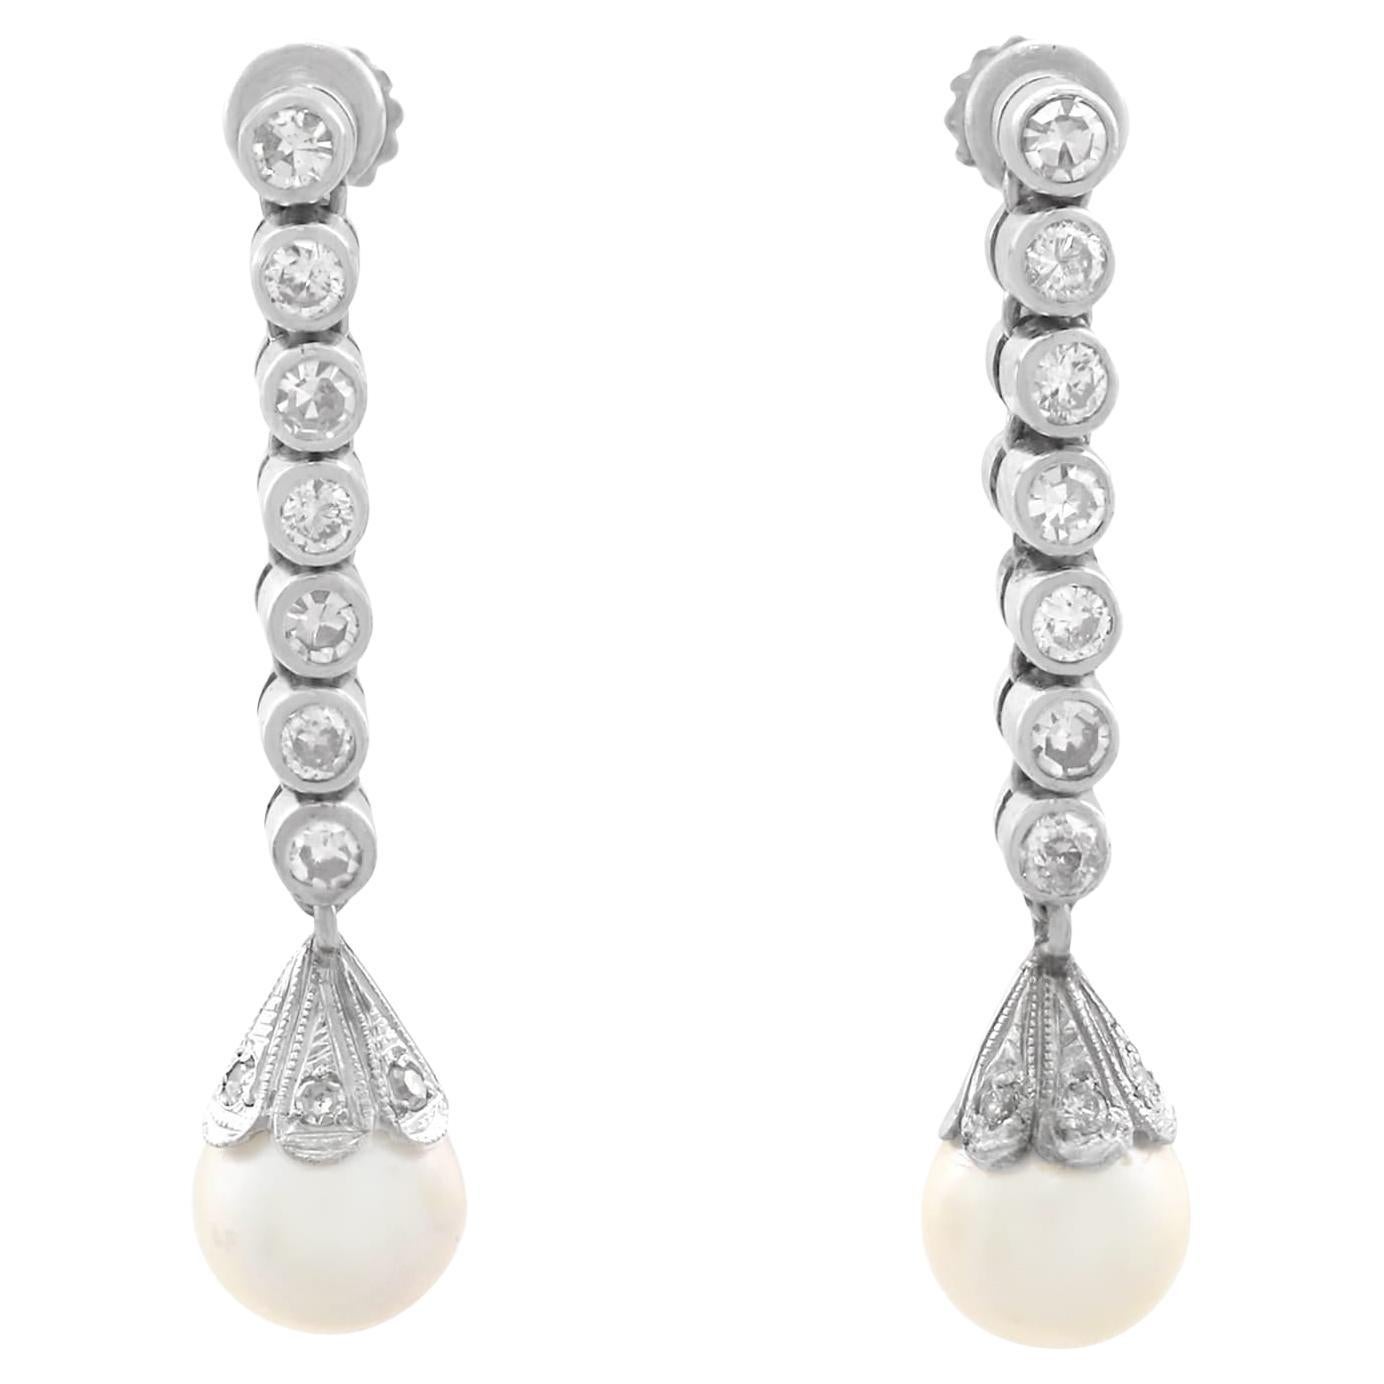 1960s Diamond and Cultured Pearl Platinum Drop Earrings